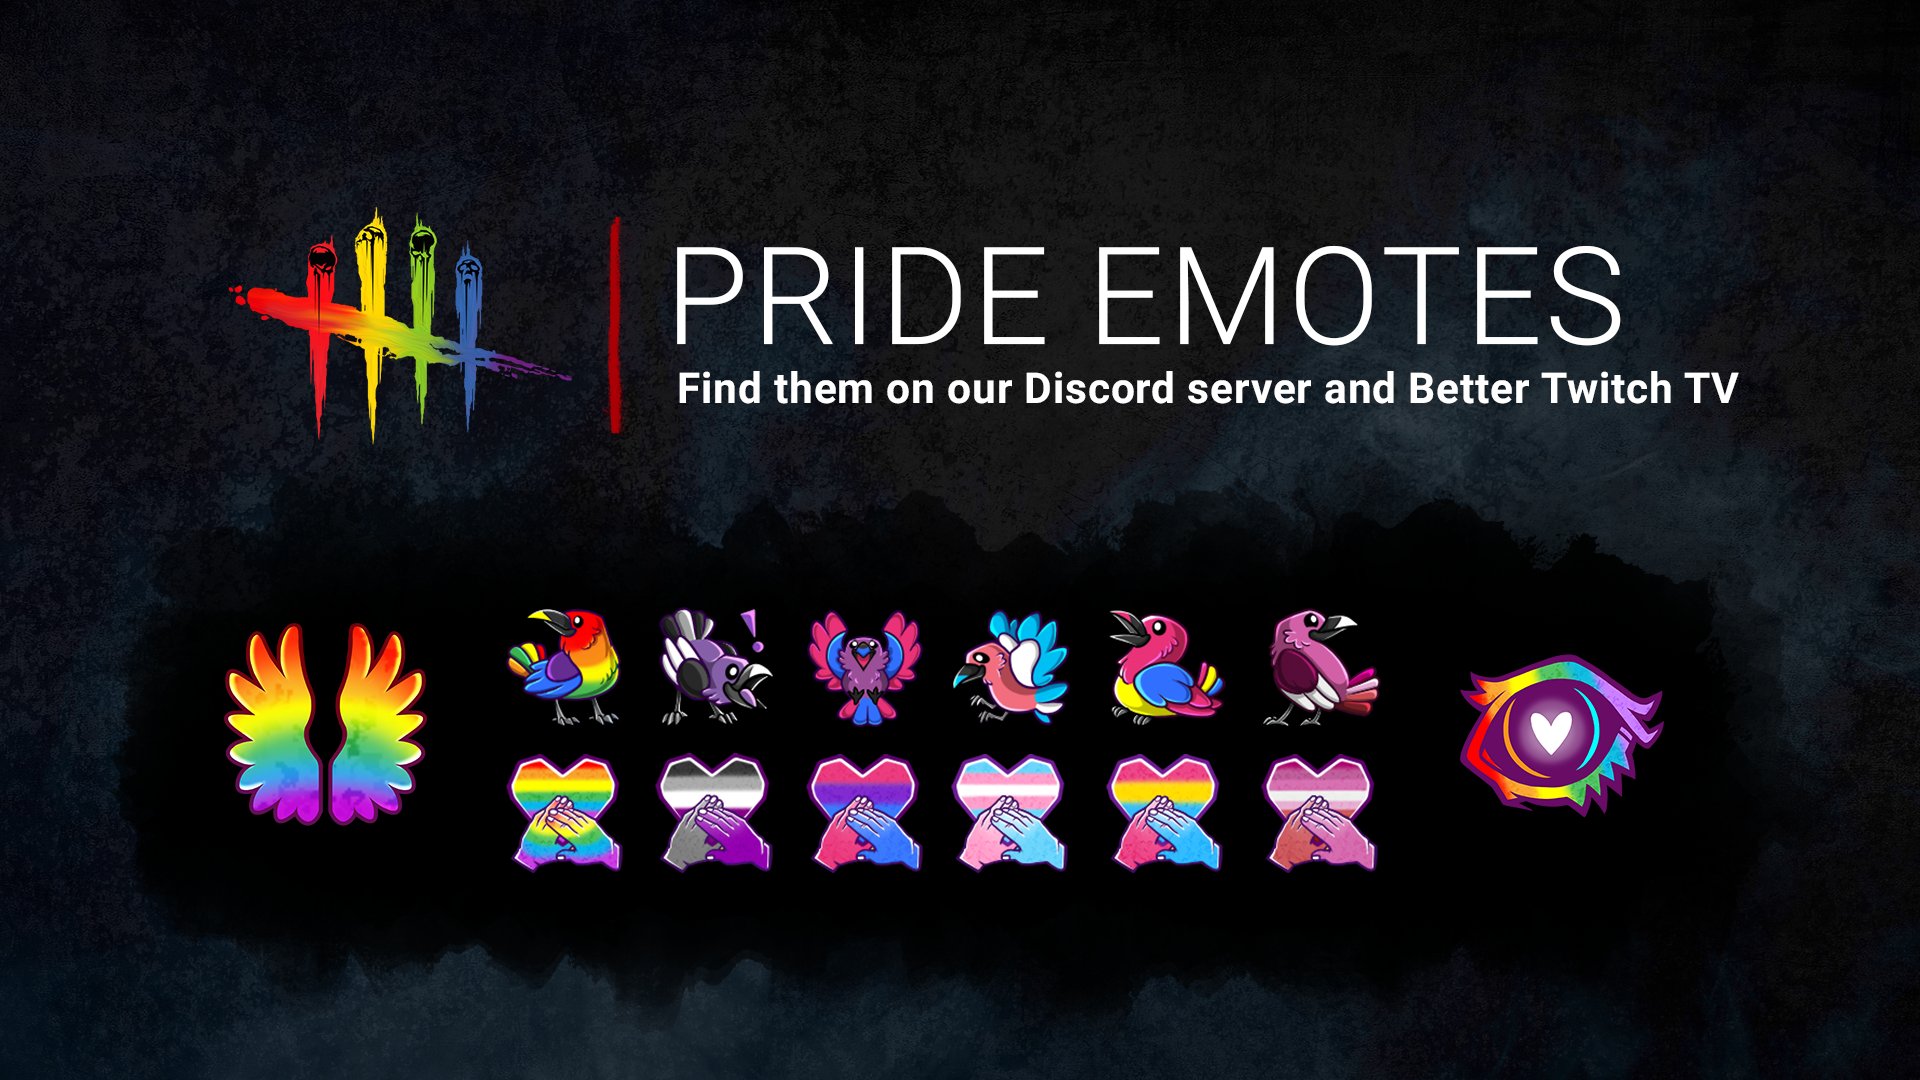 Dead By Daylight Let S Celebrate Pride Together With A Brand New Set Of Emotes Available On Better Twitch Tv We Ve Made Them Public So You Can Add Them To Your